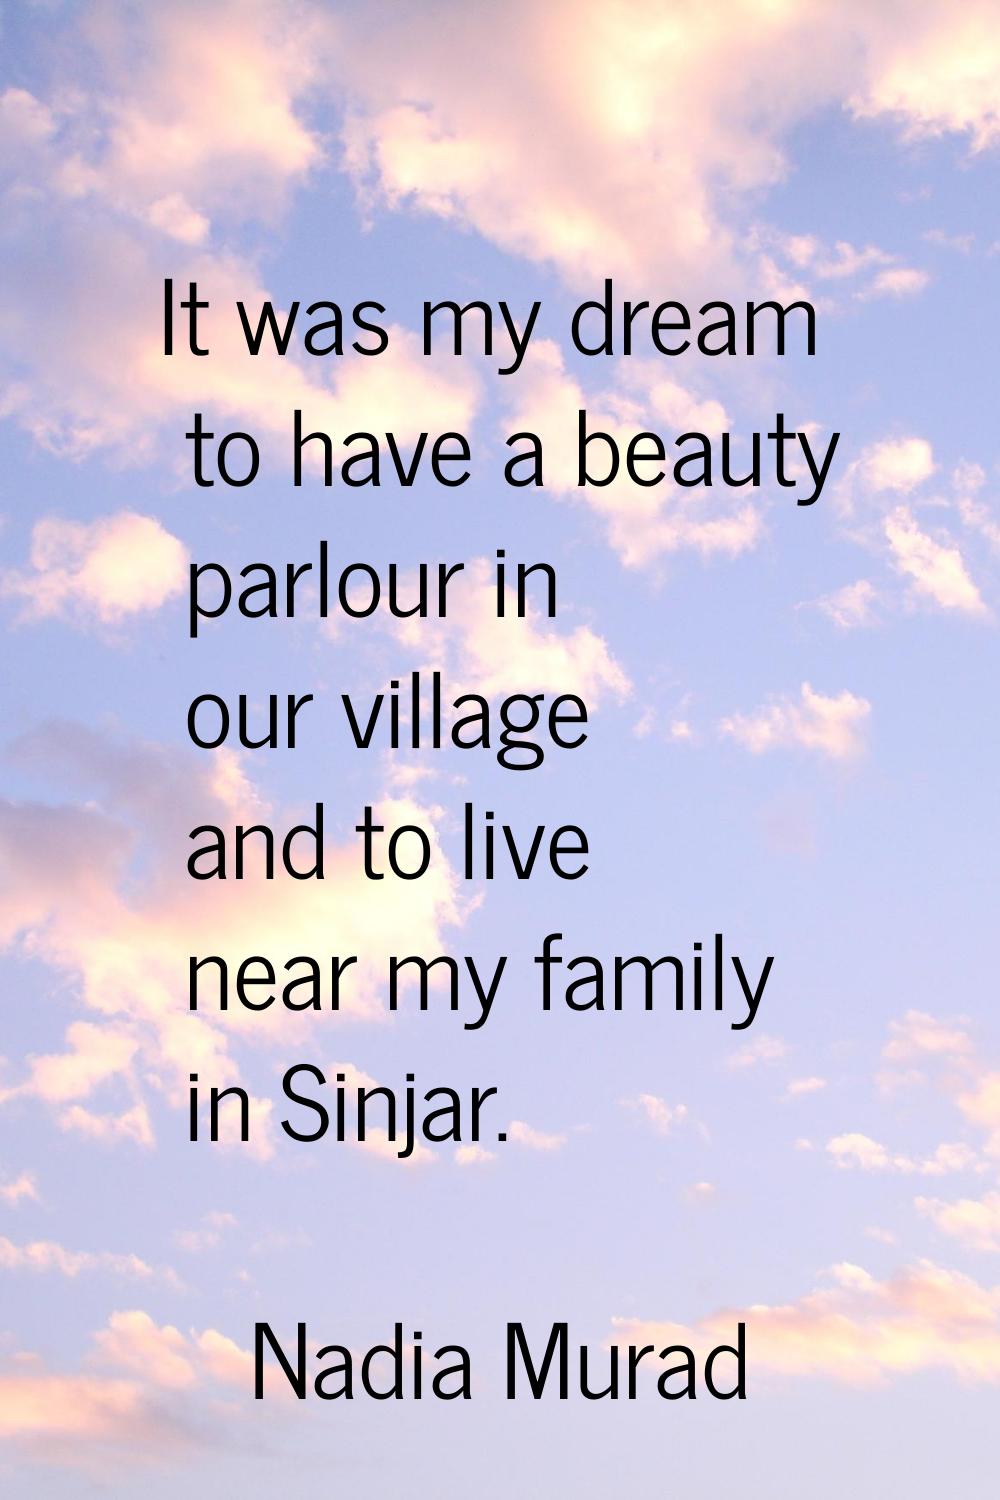 It was my dream to have a beauty parlour in our village and to live near my family in Sinjar.